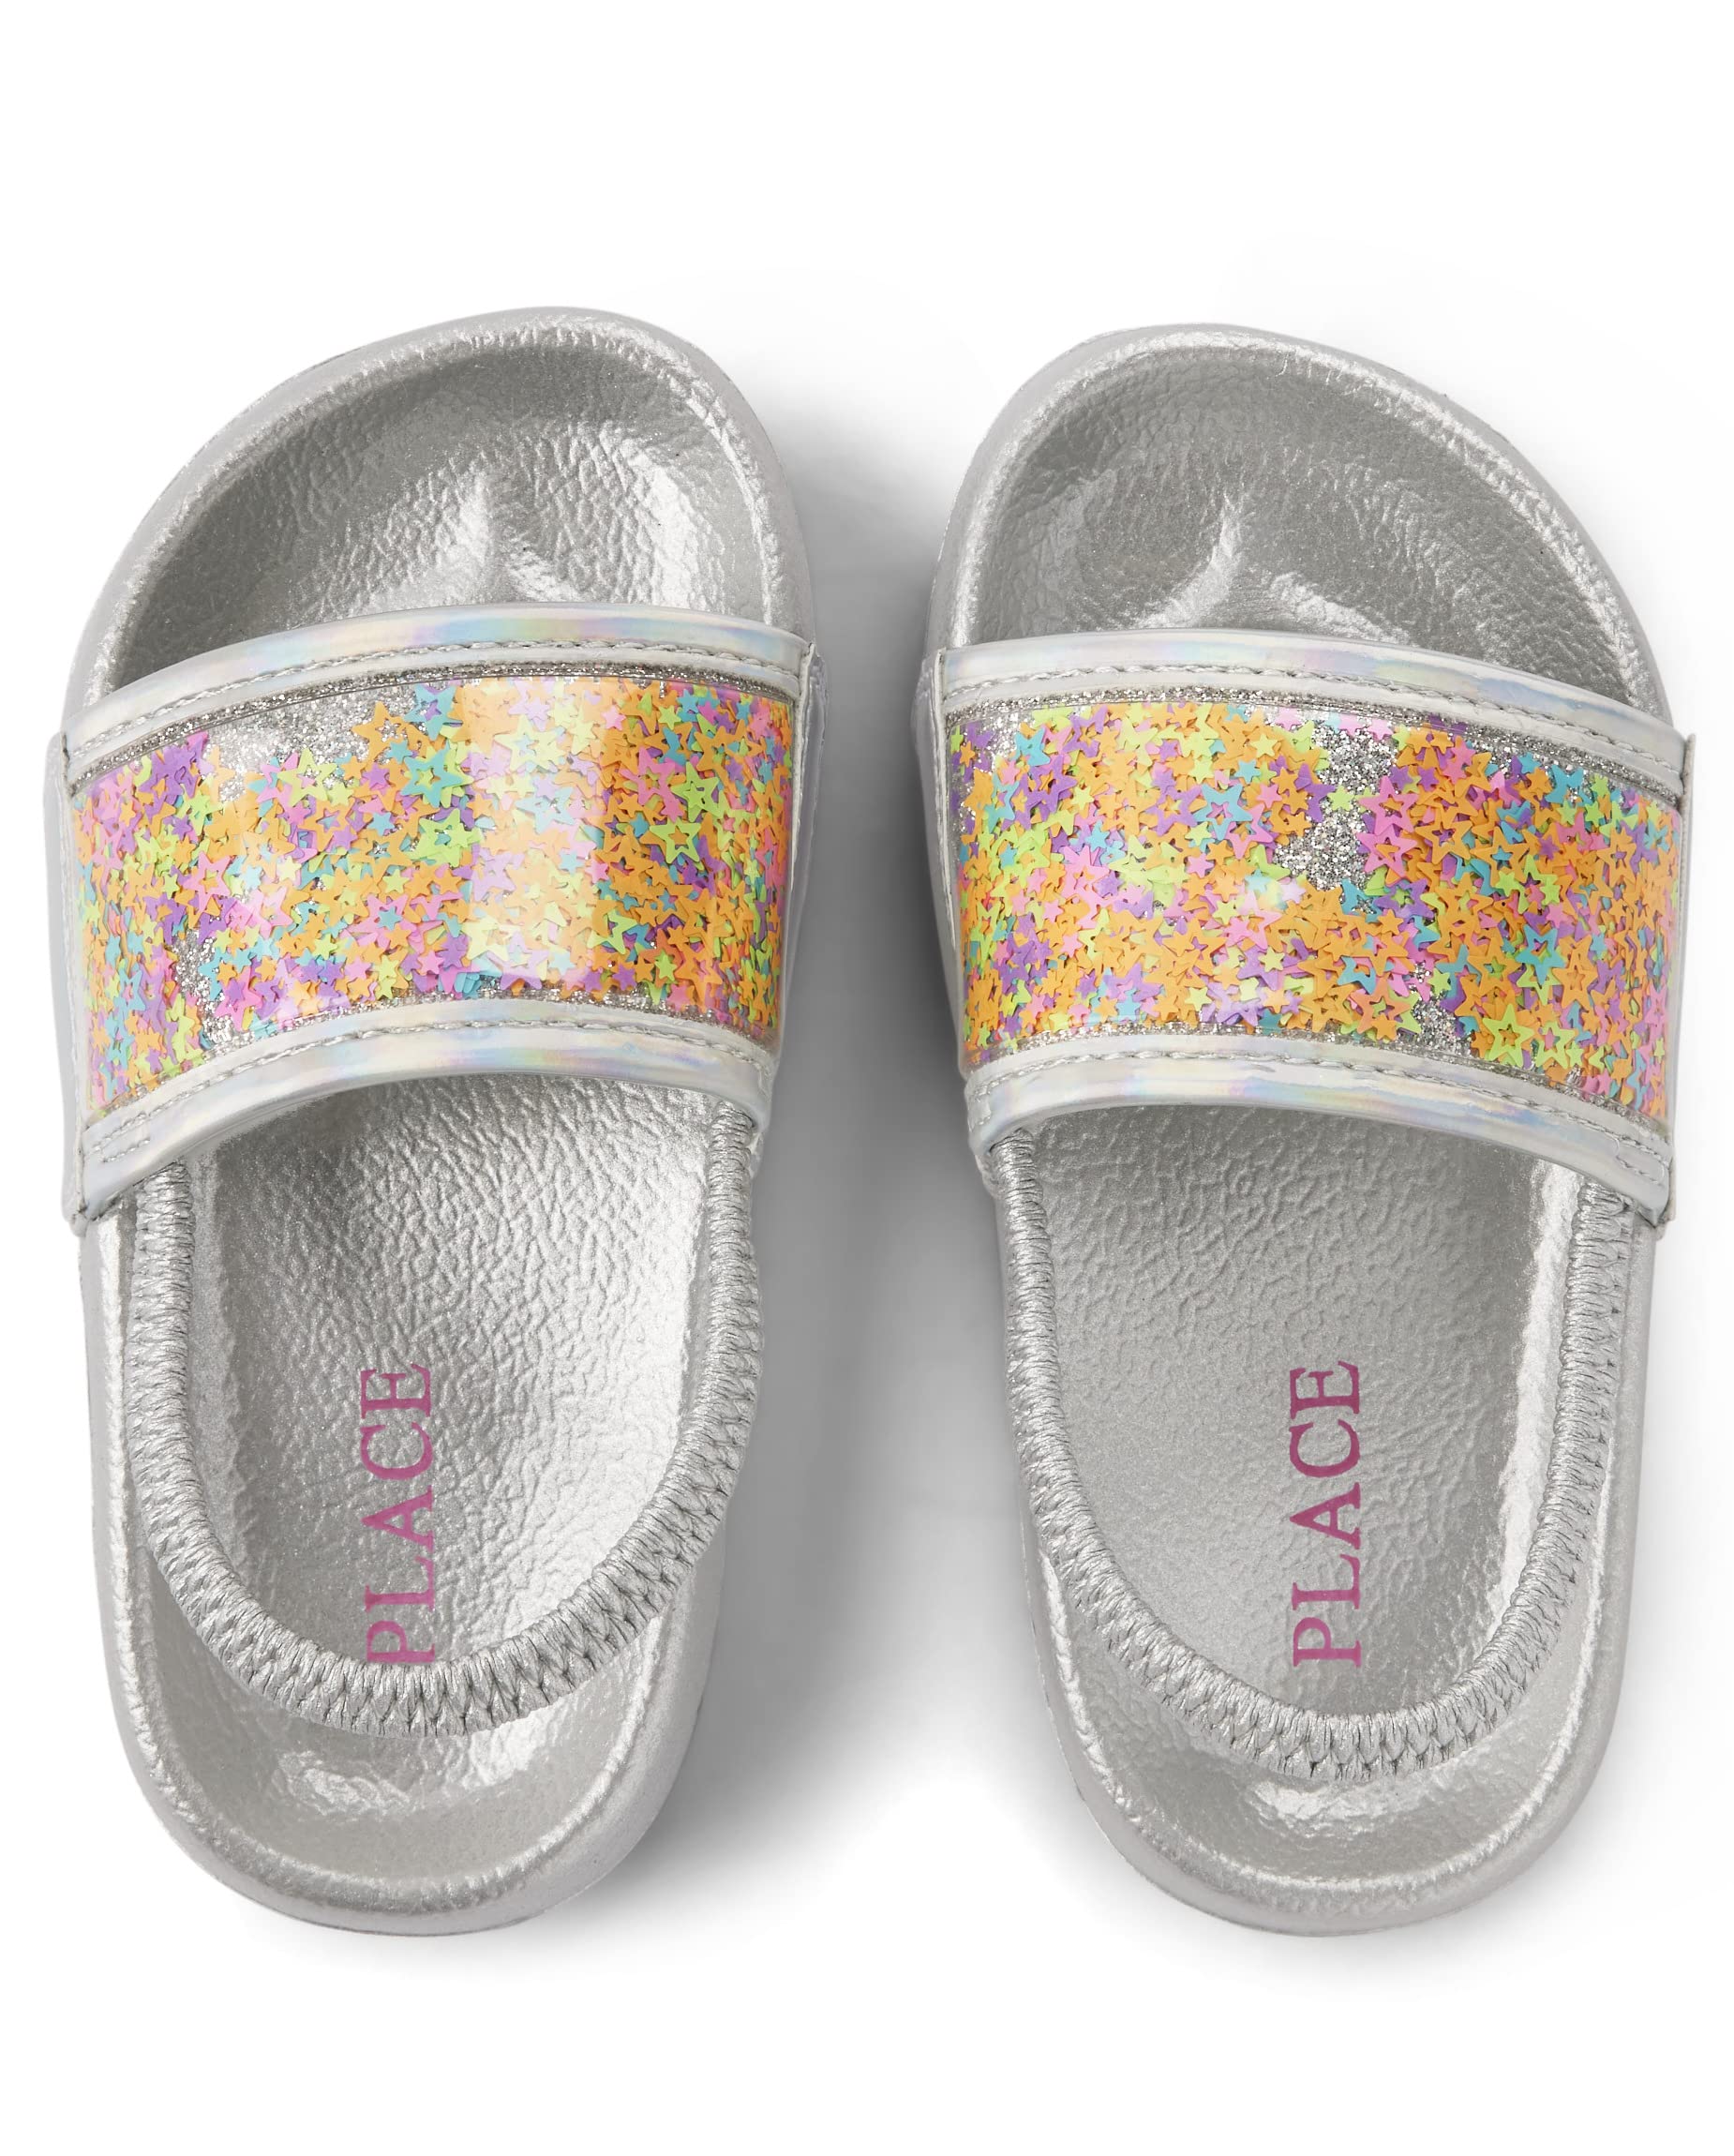 The Children's Place Unisex-Child and Toddler Girls Slides with Backstrap Sandal